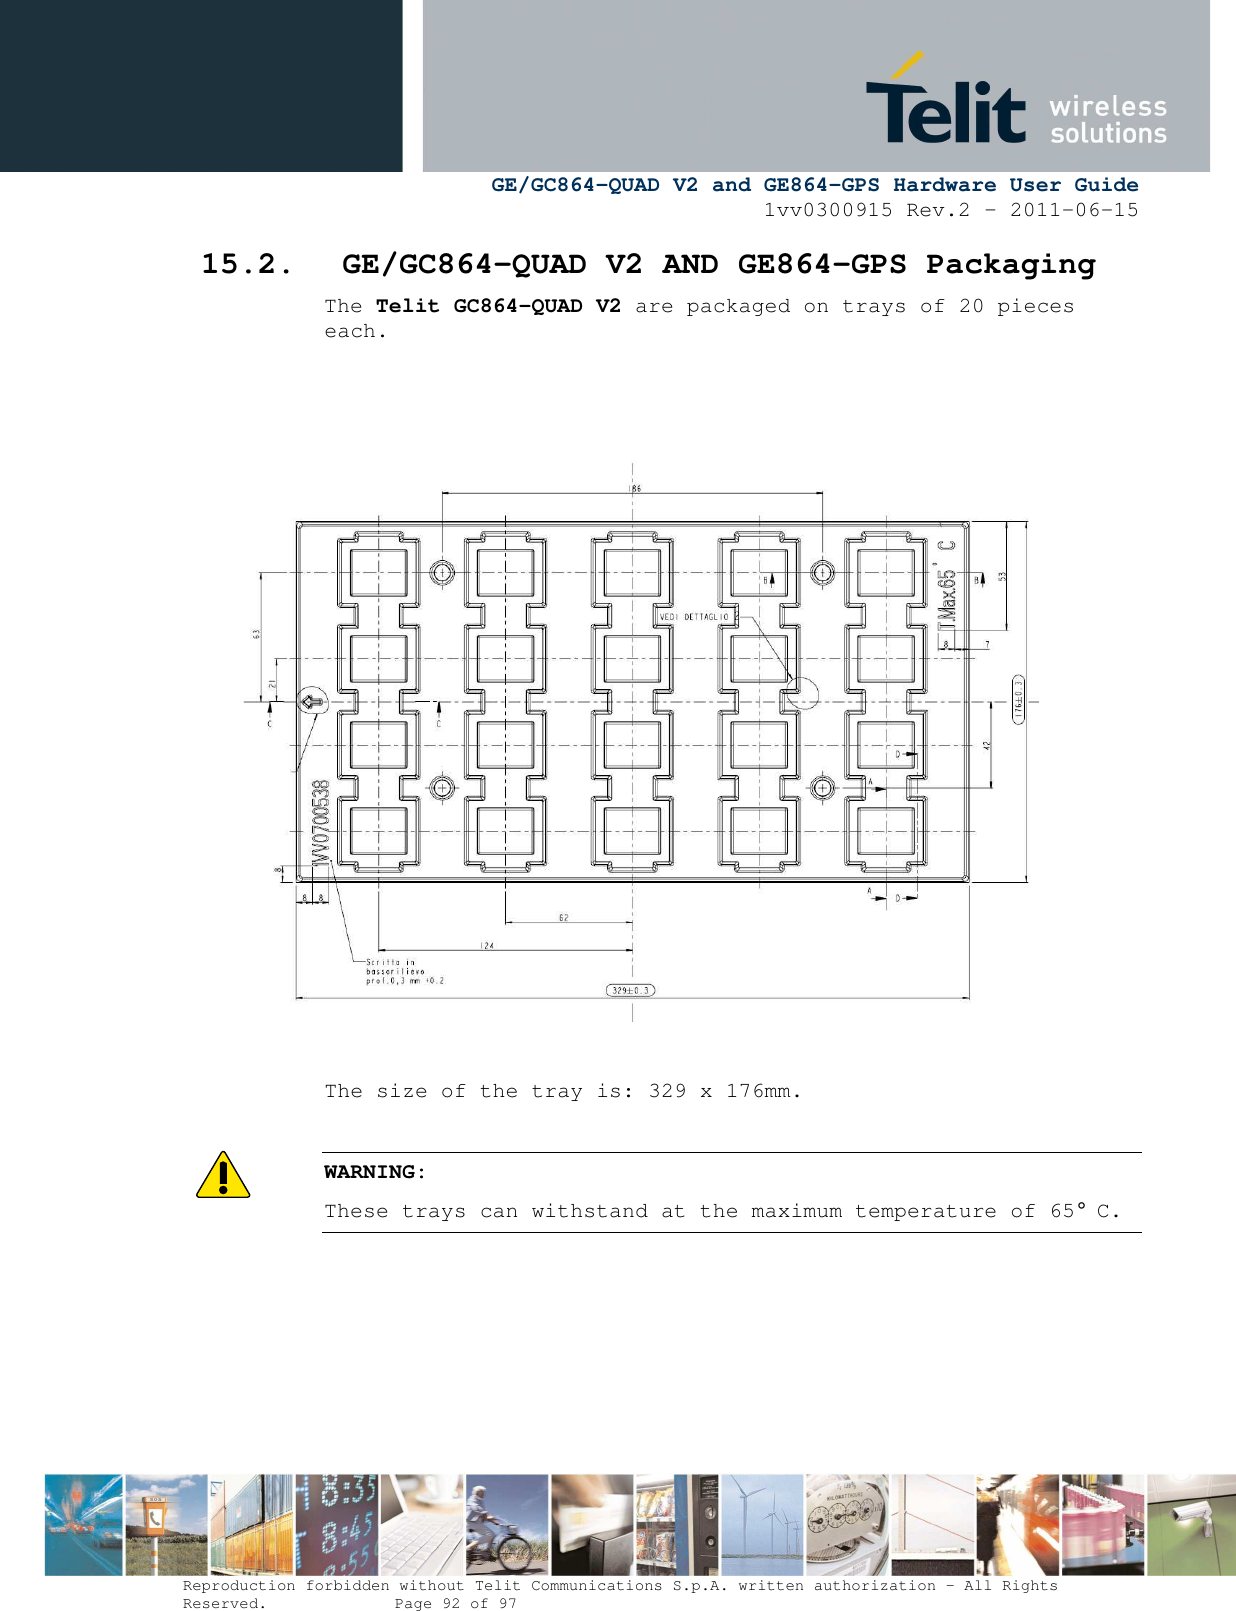      GE/GC864-QUAD V2 and GE864-GPS Hardware User Guide 1vv0300915 Rev.2 – 2011-06-15  Reproduction forbidden without Telit Communications S.p.A. written authorization - All Rights Reserved.    Page 92 of 97  15.2. GE/GC864-QUAD V2 AND GE864-GPS Packaging The Telit GC864-QUAD V2 are packaged on trays of 20 pieces each.                     The size of the tray is: 329 x 176mm.  WARNING: These trays can withstand at the maximum temperature of 65° C.   